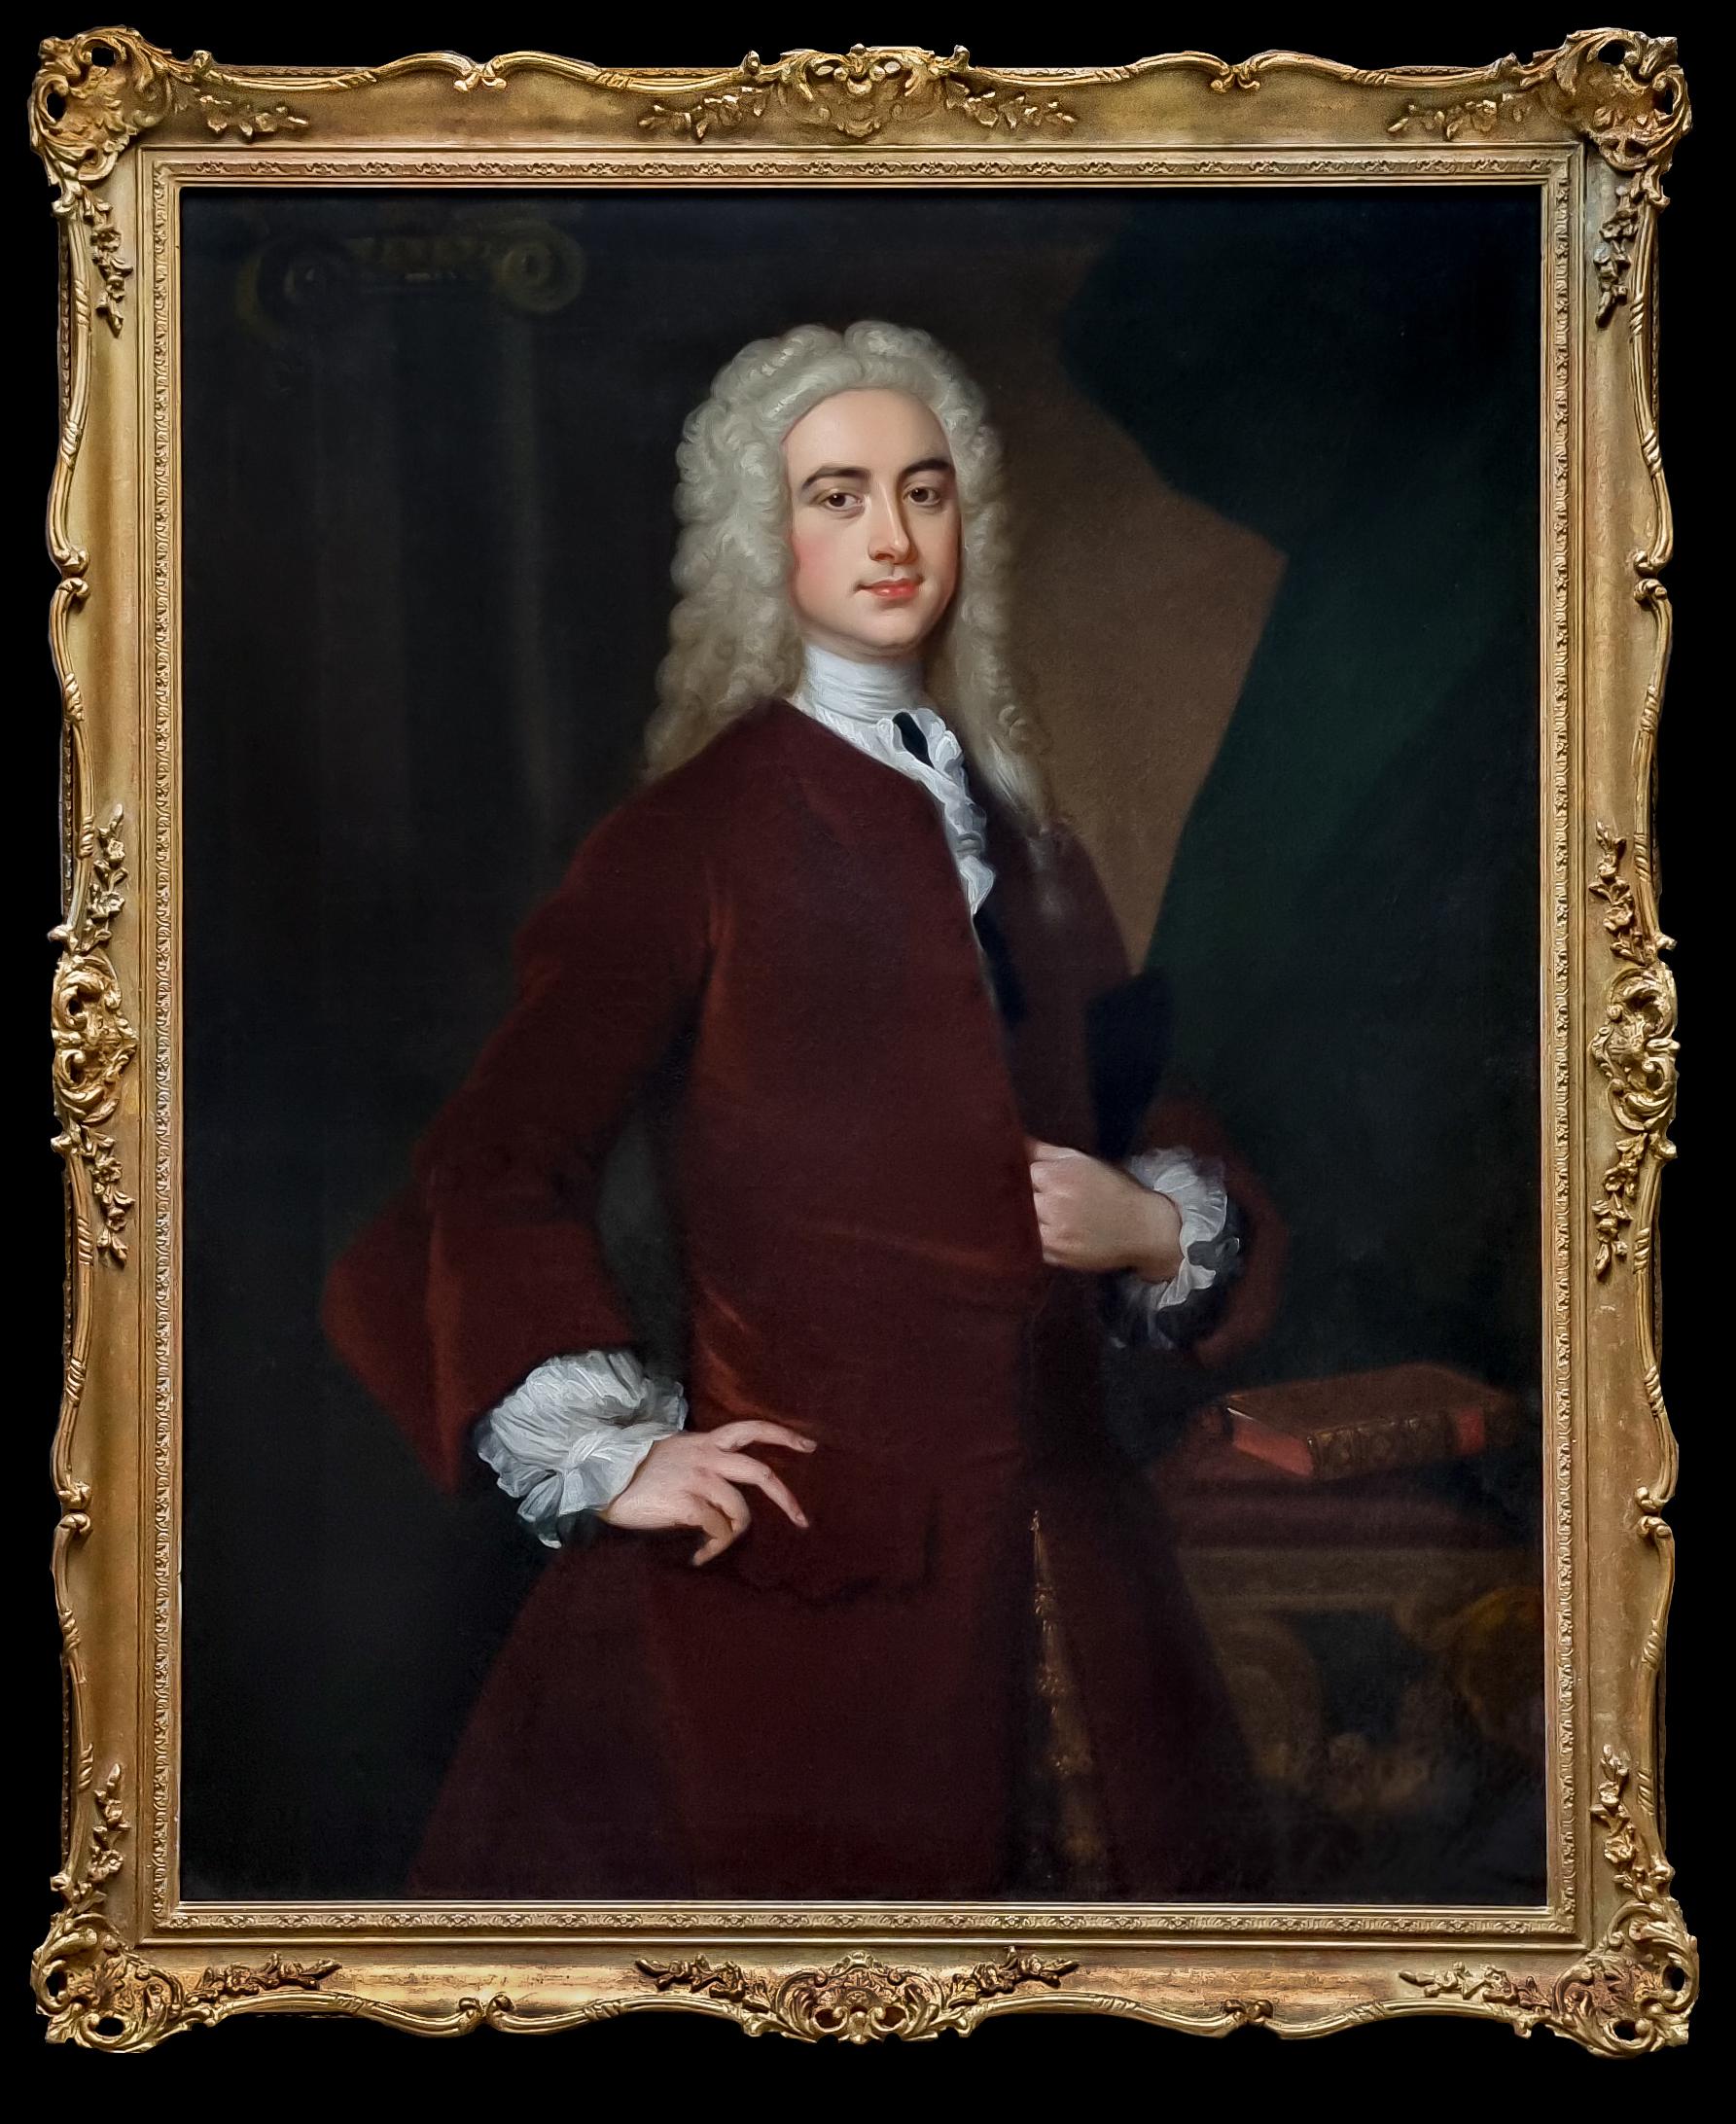 Portrait of a Gentleman, Townsend Andrews c.1725; Thomas Hudson, Oil on canvas 1